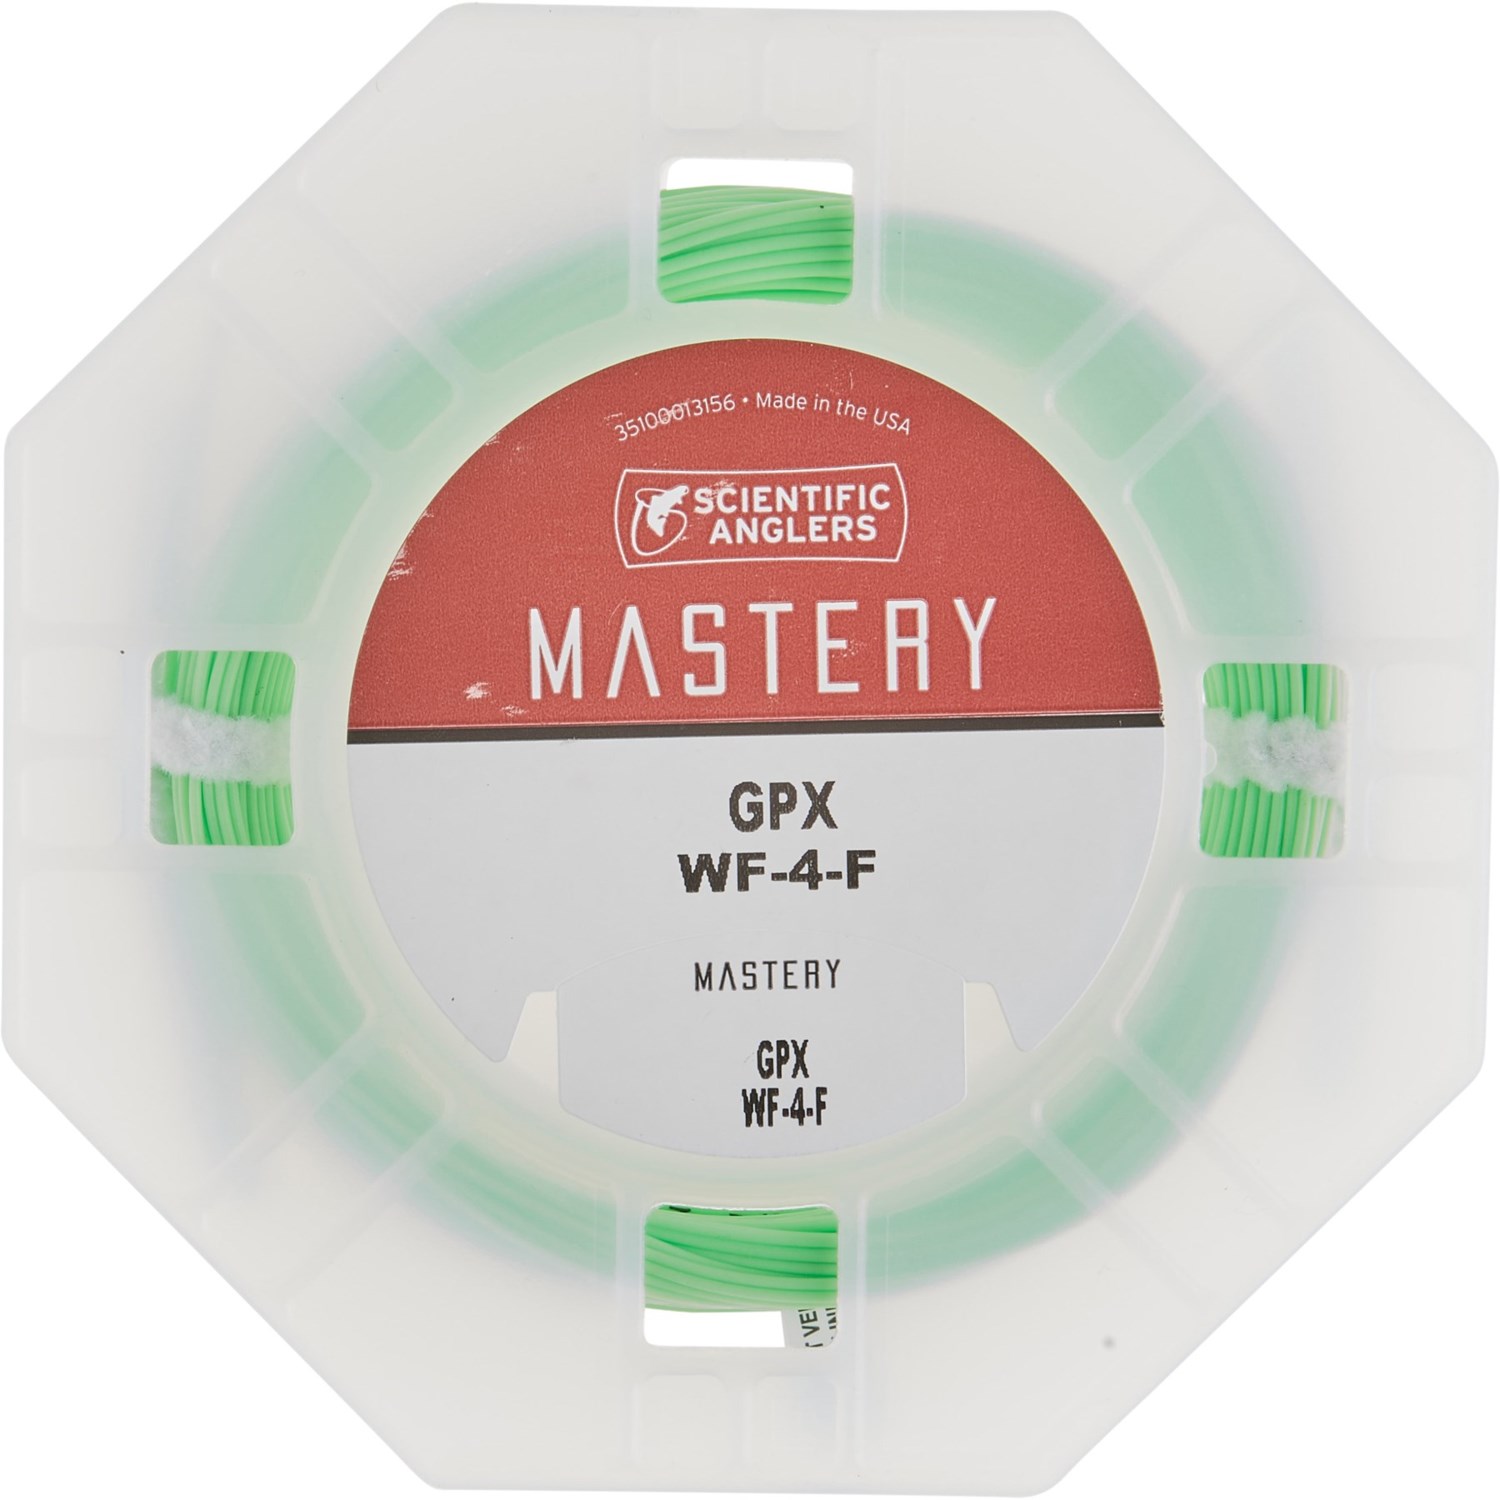 Scientific Anglers Mastery GPX Fly Line - Weight Forward - Save 66%